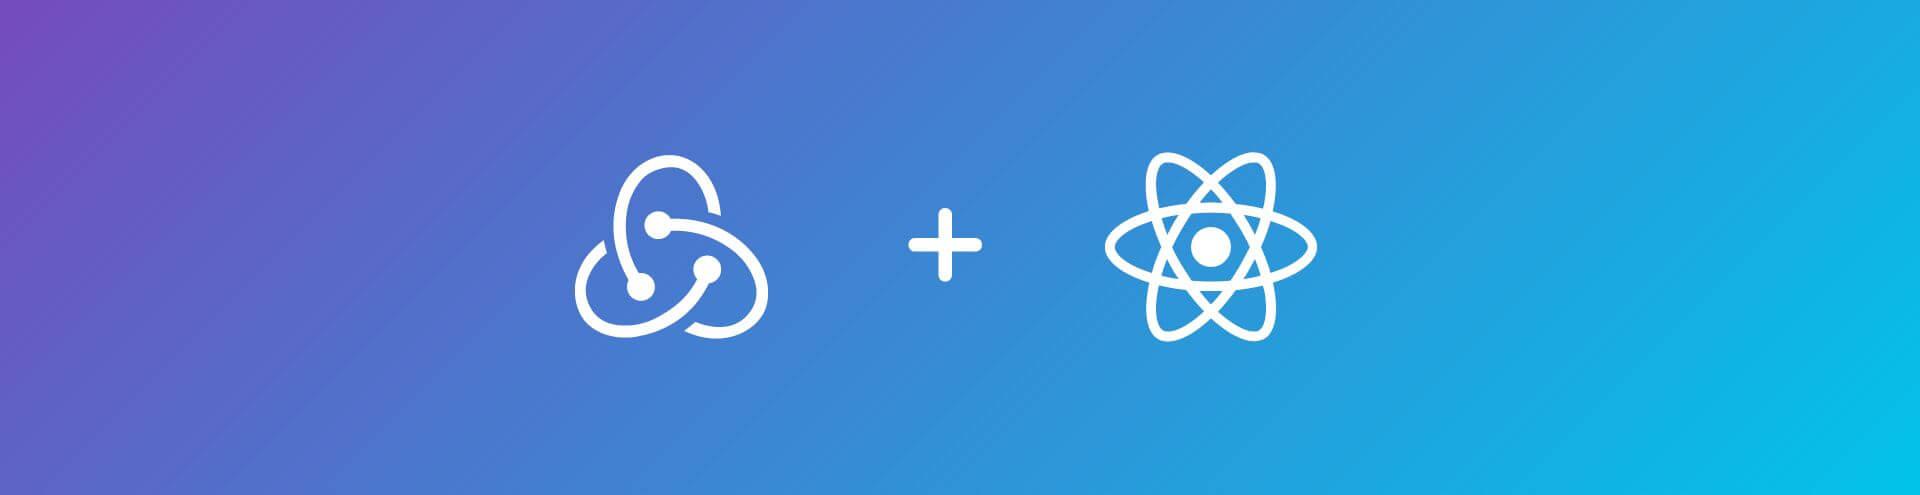 How to Improve React+Redux Code With Redux Thunk Package